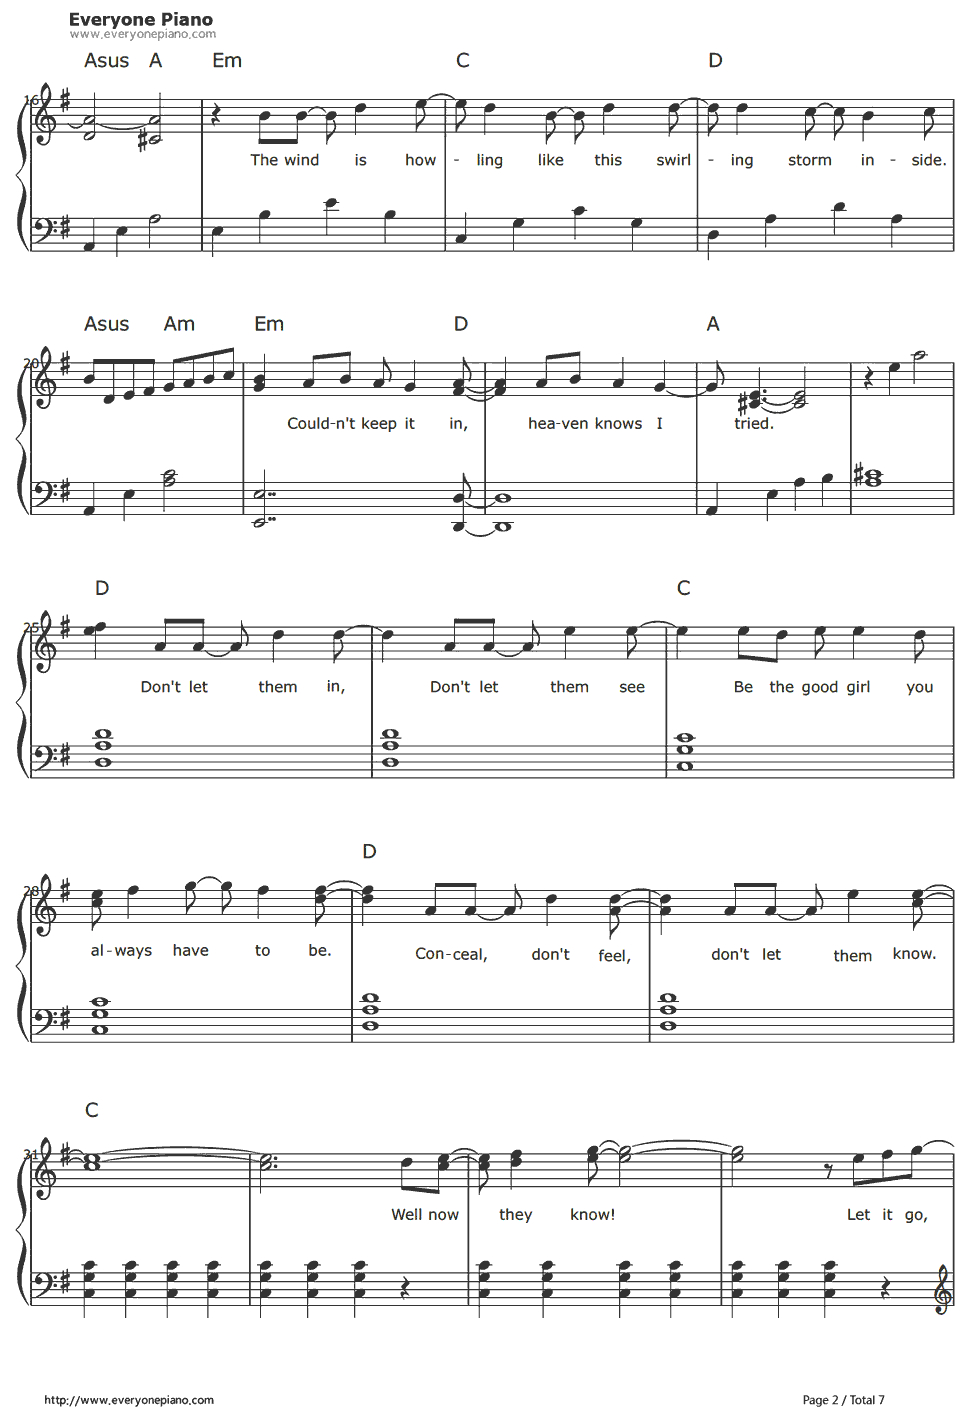 Free Let It Go Easy Version-Frozen Theme Sheet Music Preview 2 - Let It Go Violin Sheet Music Free Printable